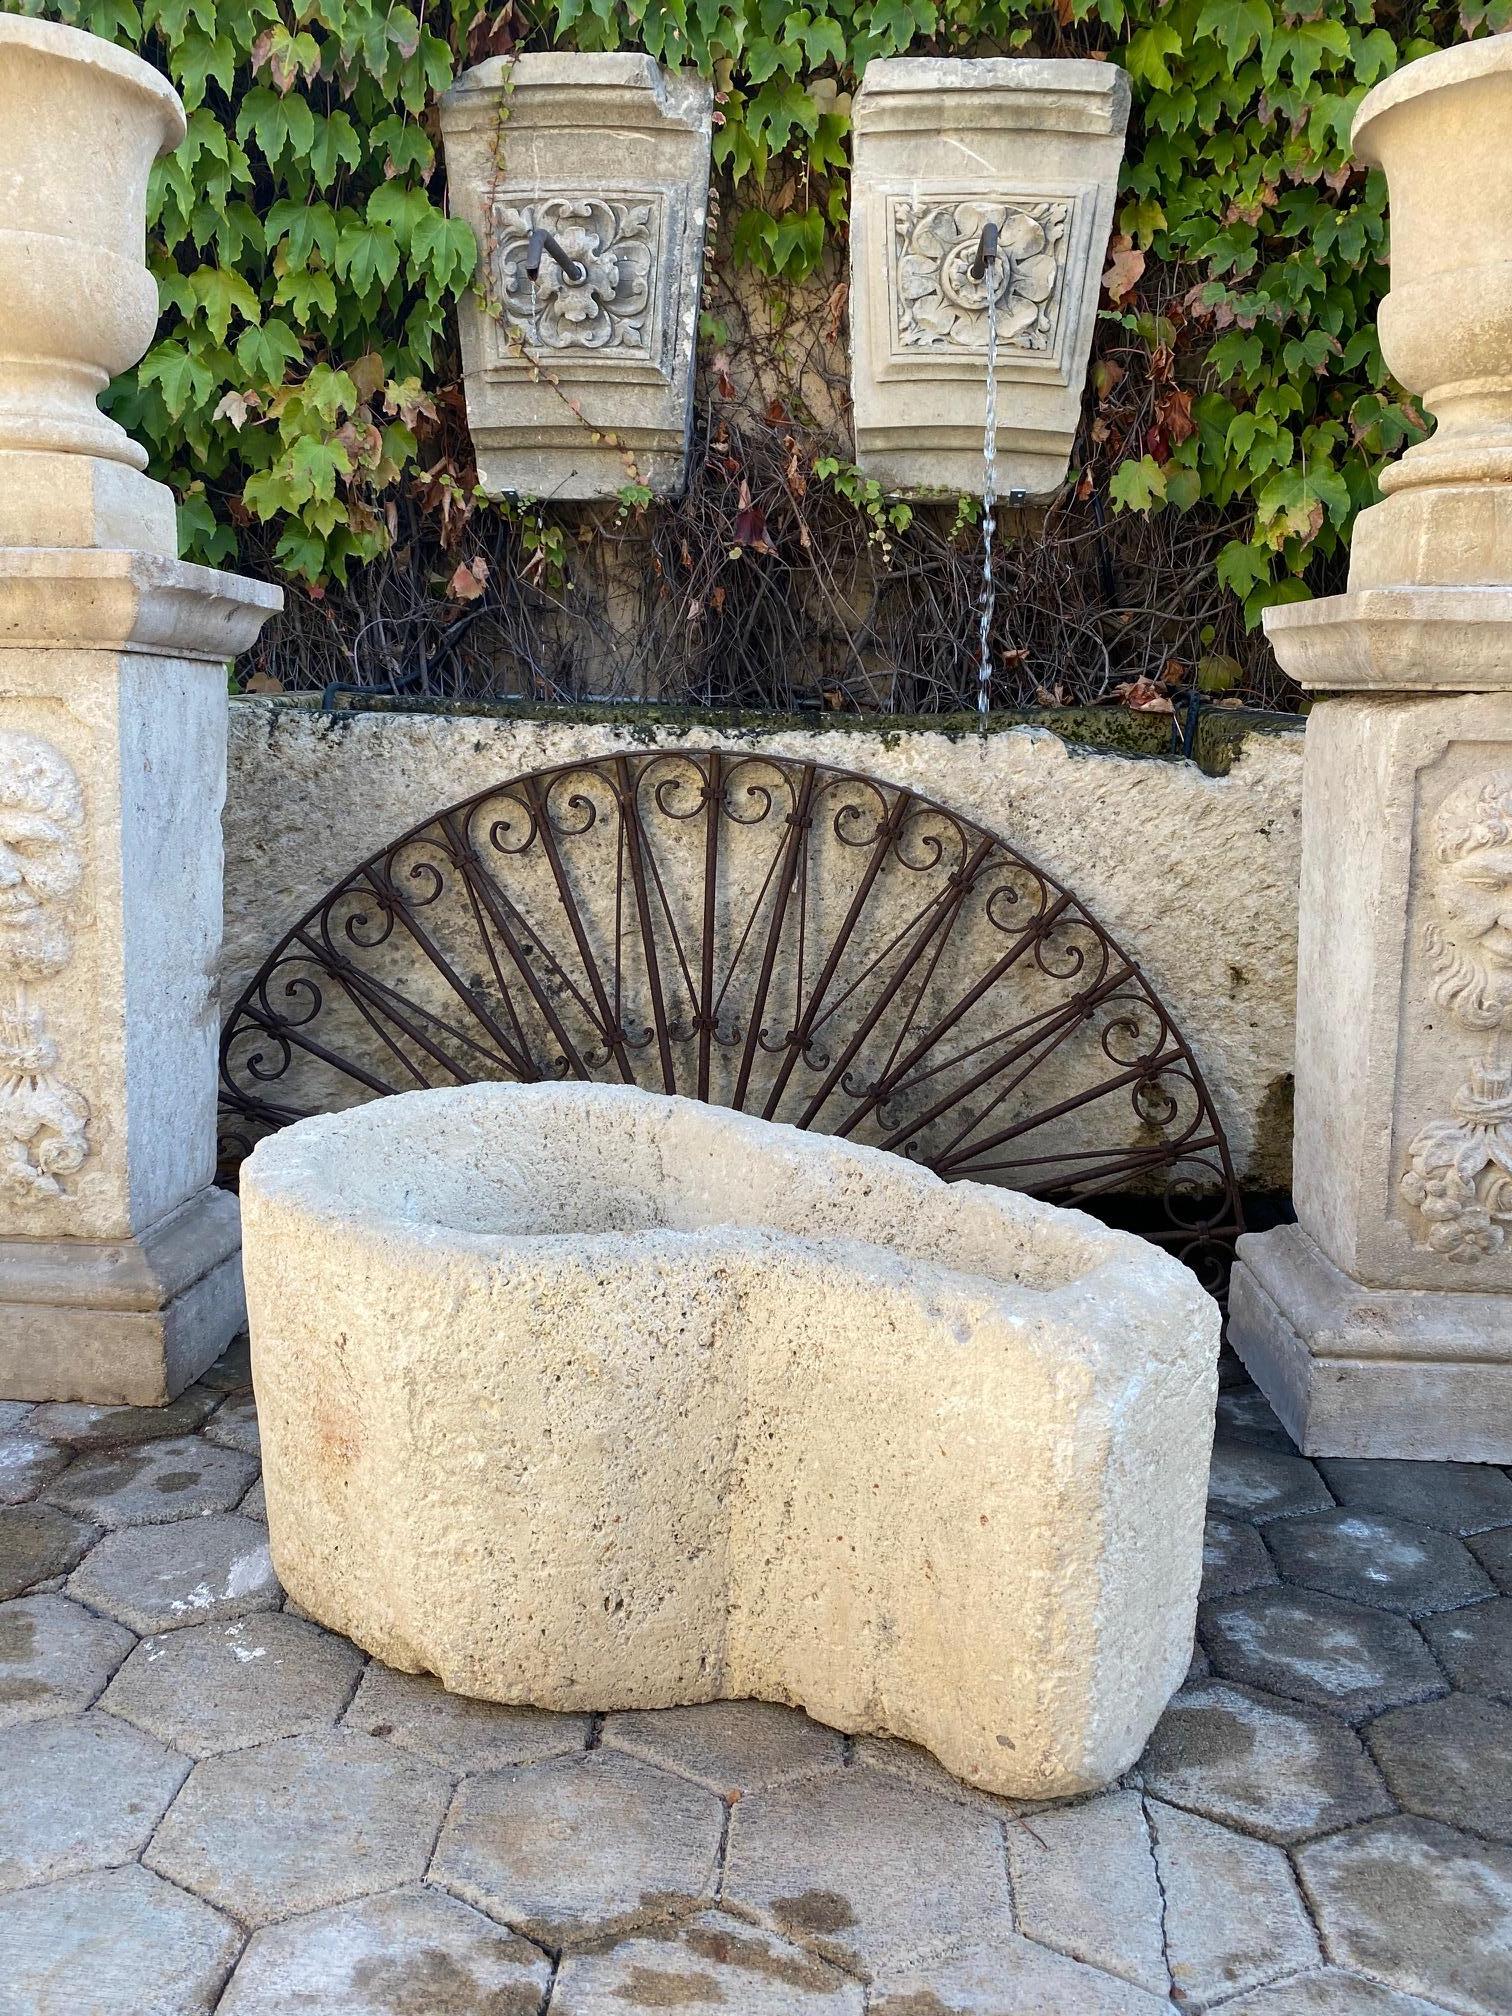 Used in the fabrication du jambon Maître jambonnier . 18th / 19th century water Jambonier of hand carved stone container to dry cure the ham. This trough basin could be installed with a simple bronze metal spout to create a charming garden water